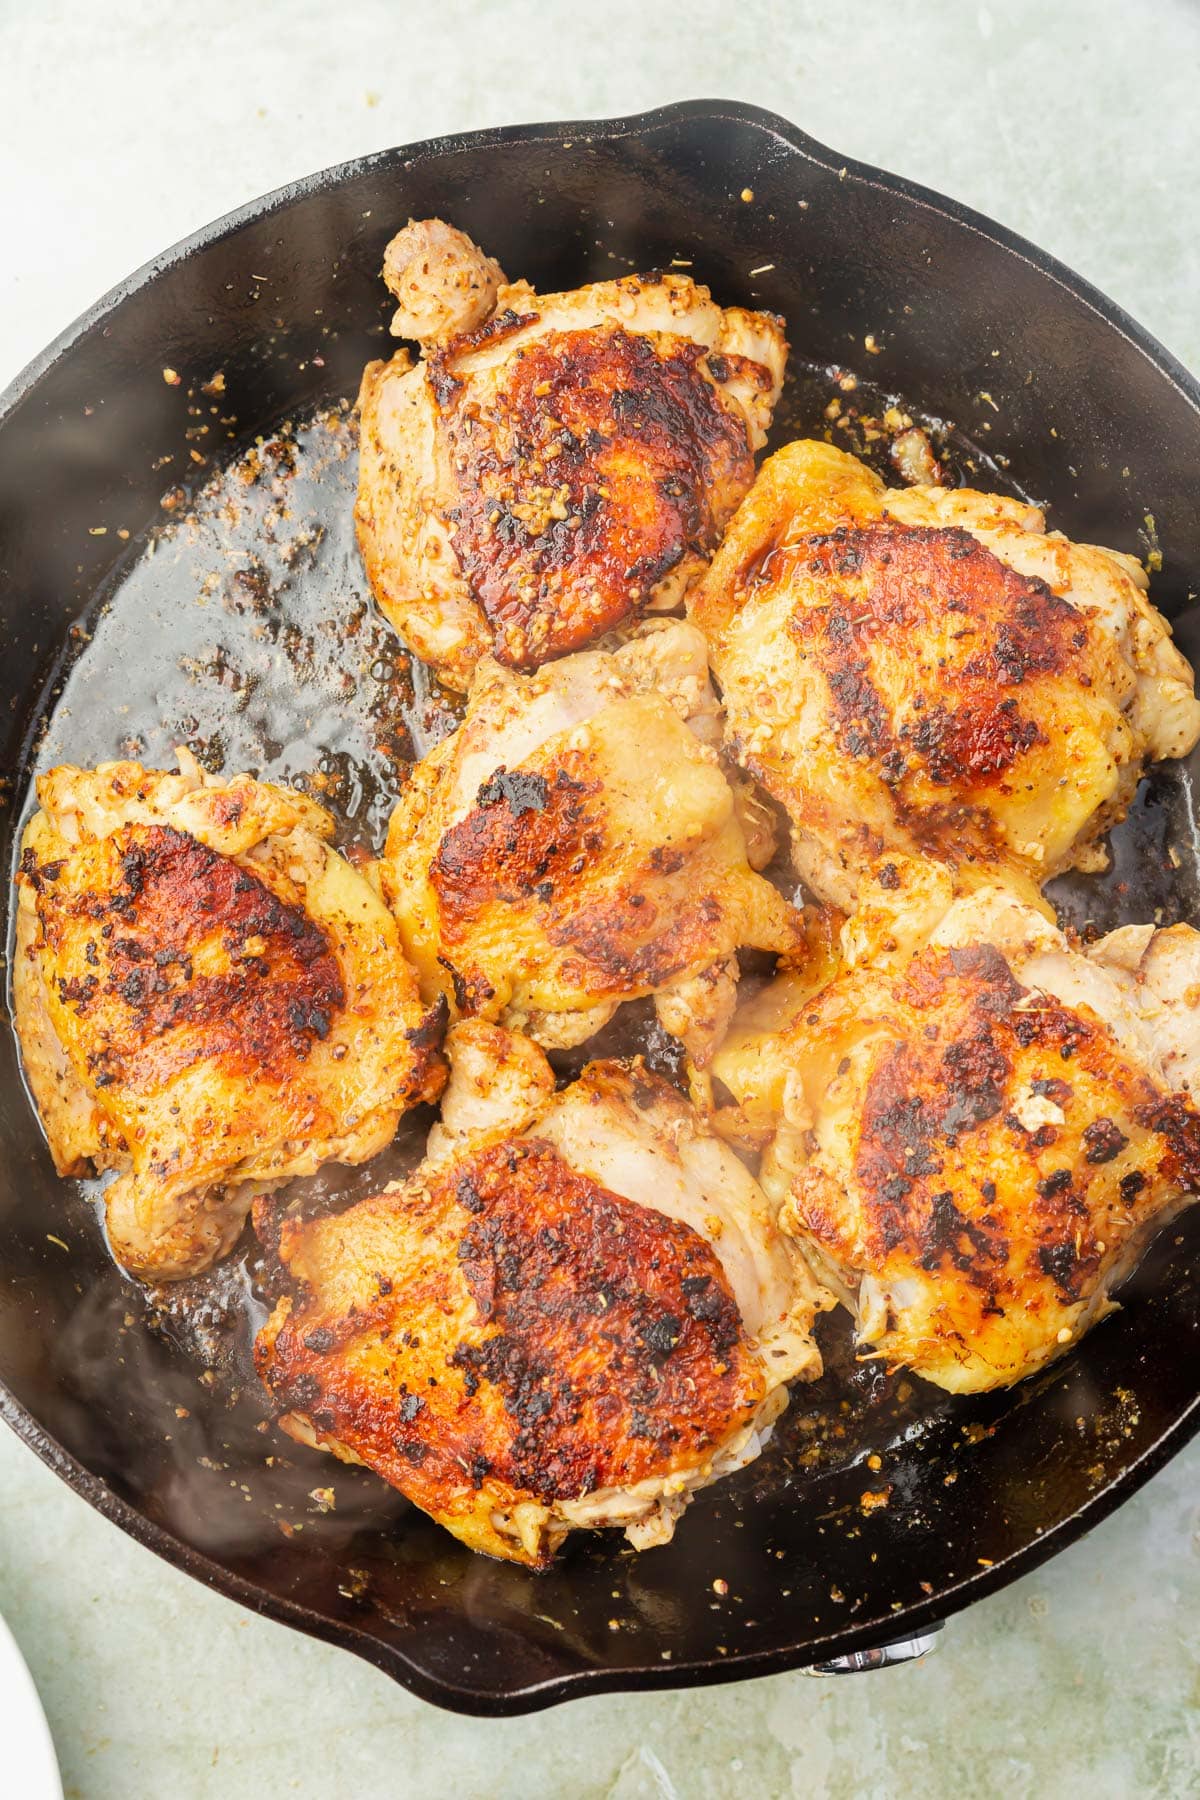 A large cast iron skillet with browned chicken thighs in it.